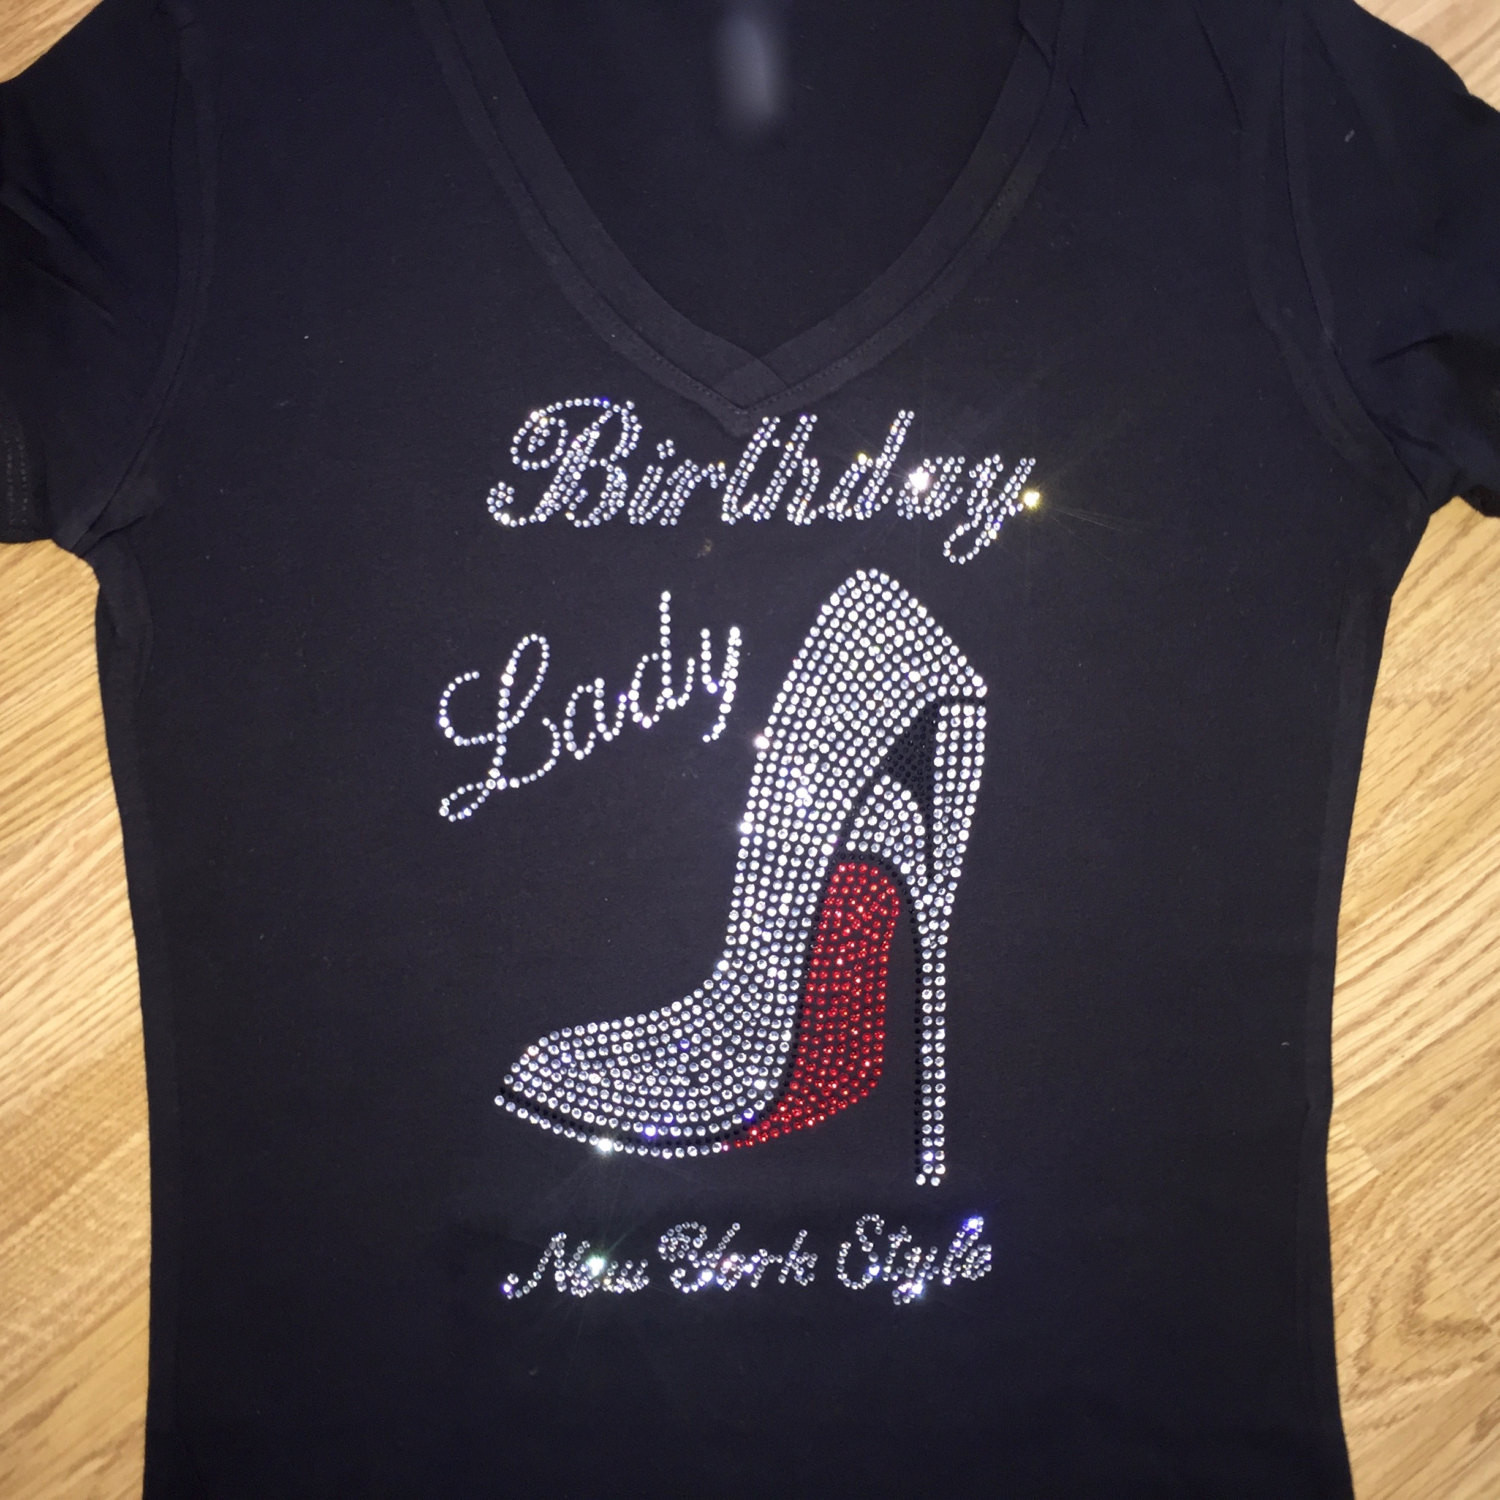 Birthday Party T Shirts Ideas
 1 New York girl s Weekend shirts Birthday party